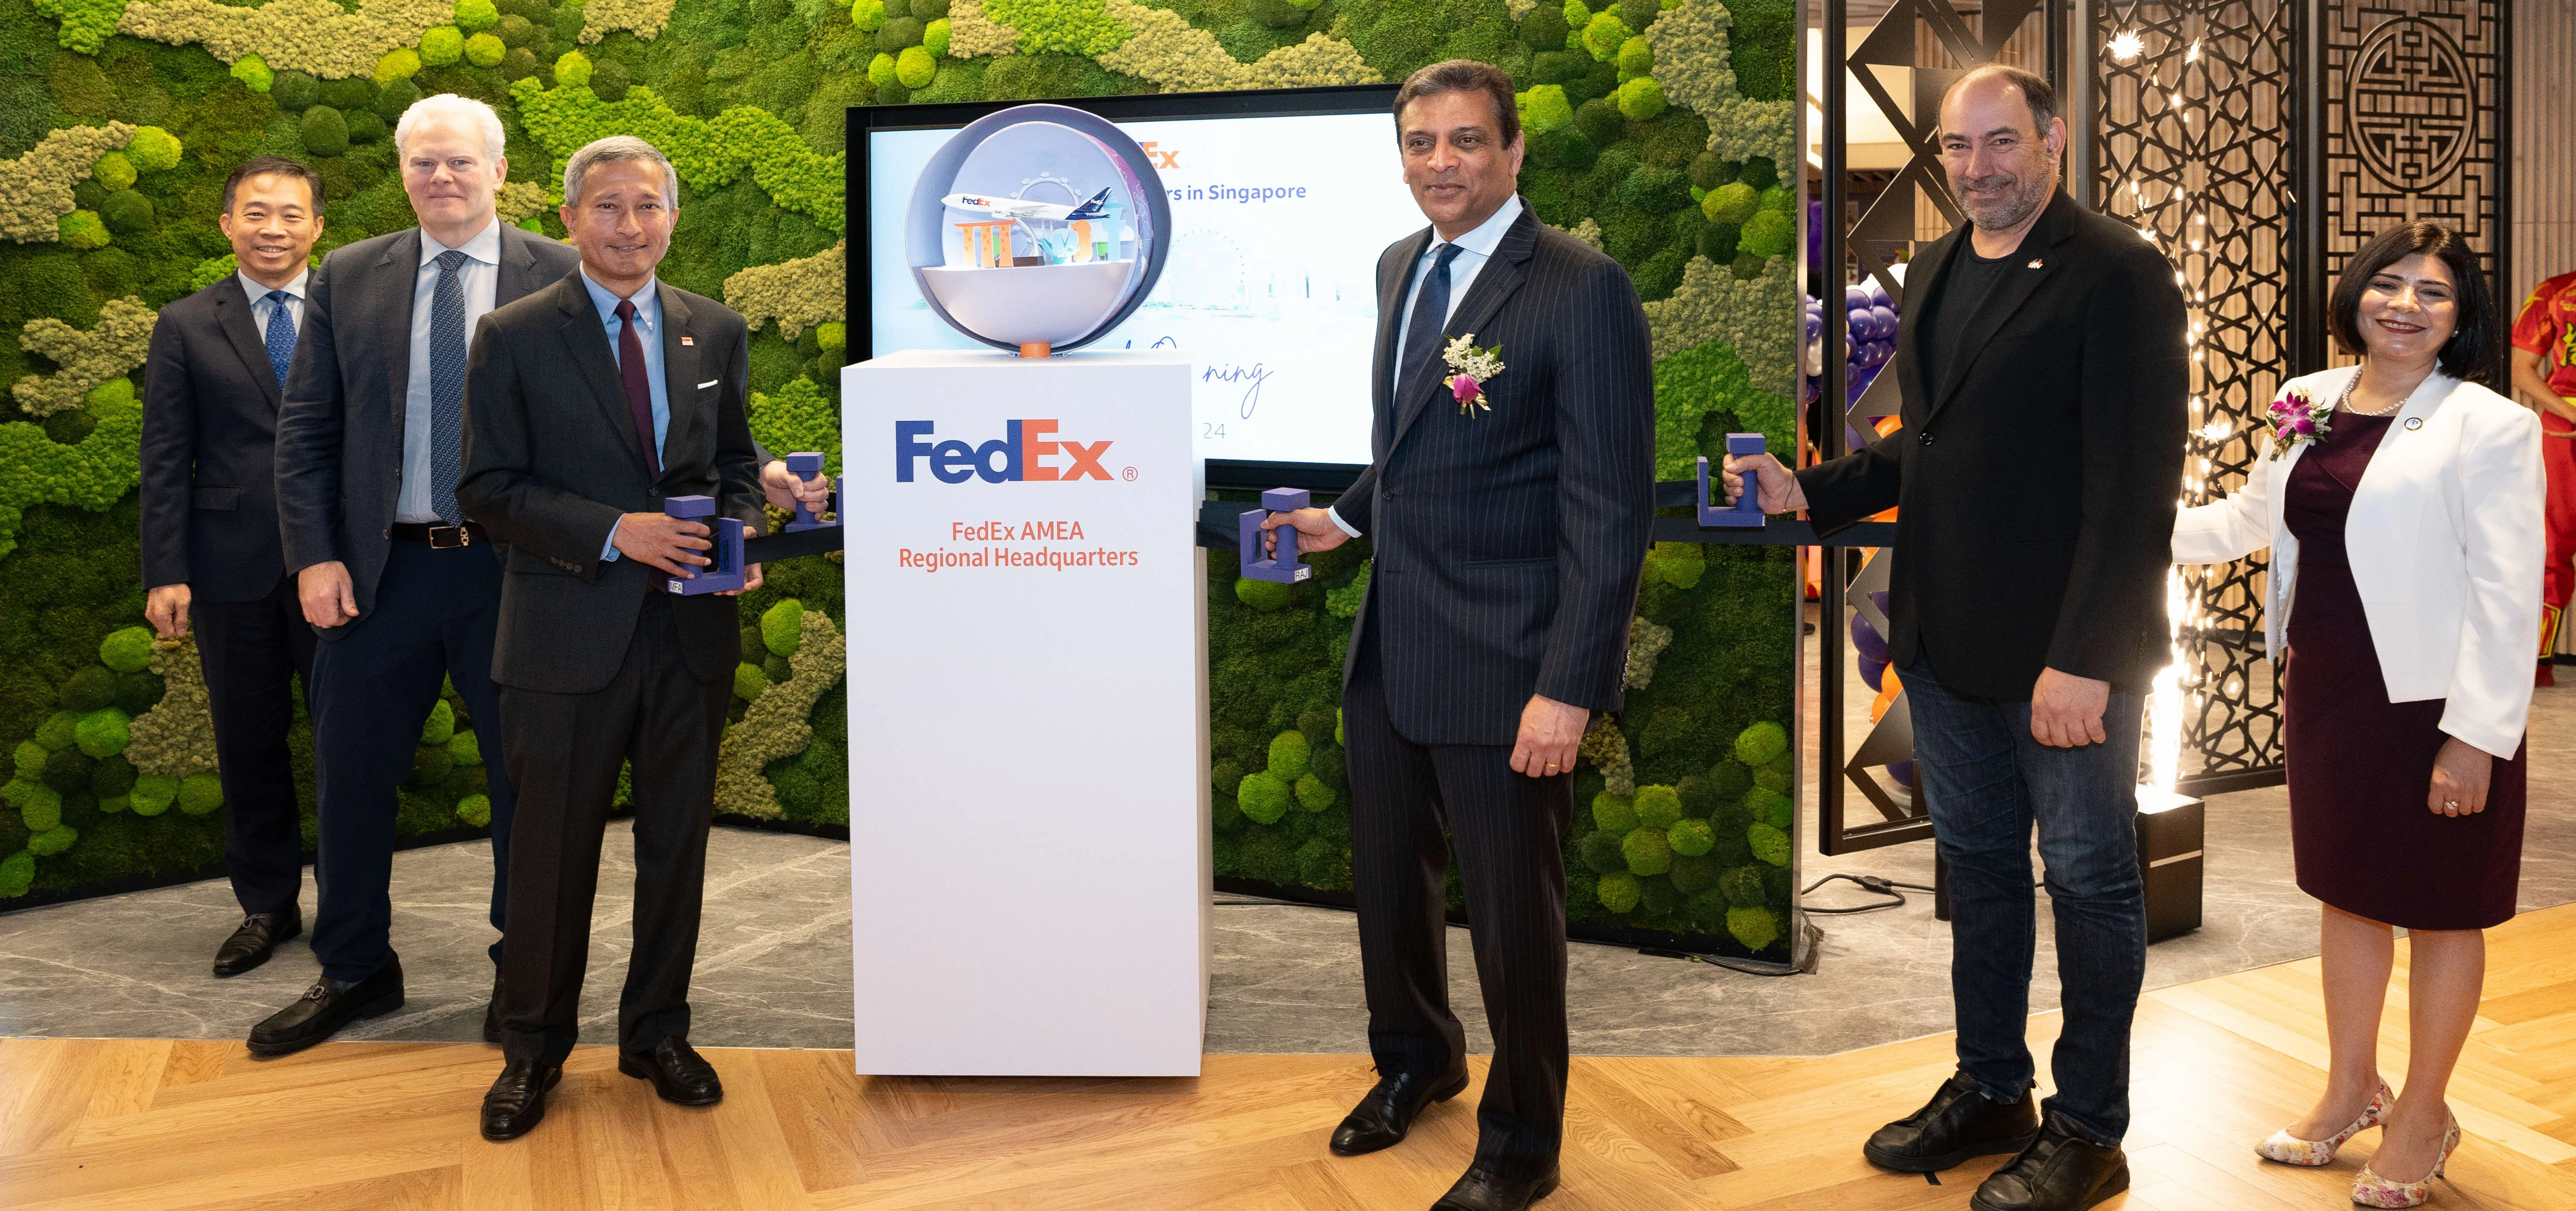 FedEx primes for Growth with new regional headquarters in Singapore, bolstering logistics and talent development